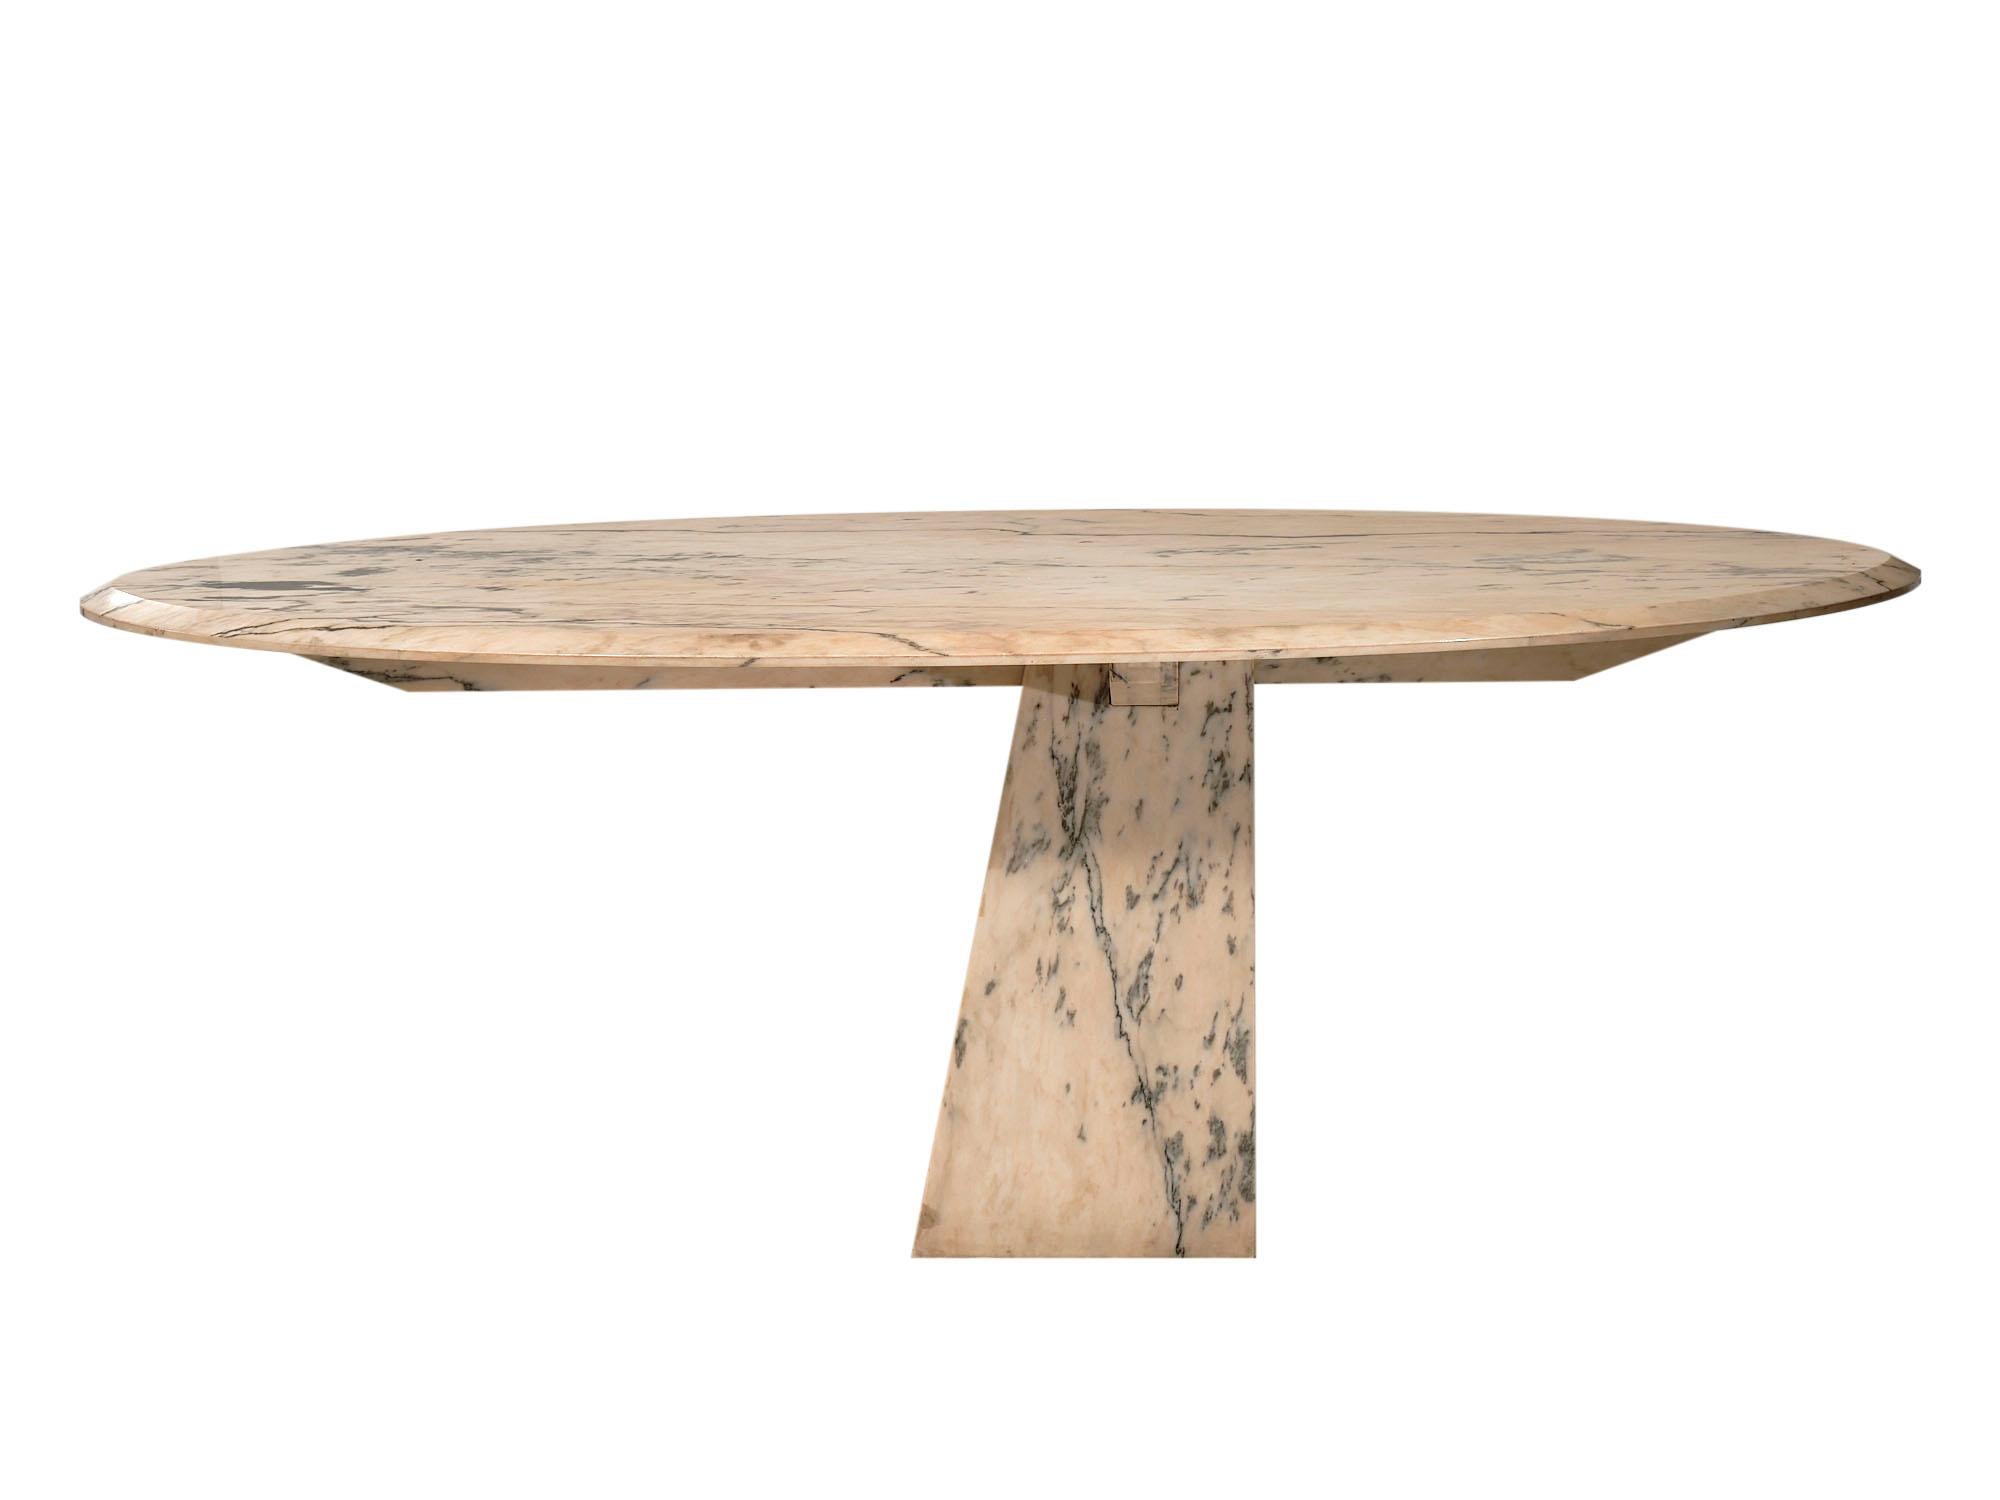 Marble dining table from Italy made of Diana Rosa Carrara Marble. The top sits on a pyramidal base in a cantilevered dynamic.